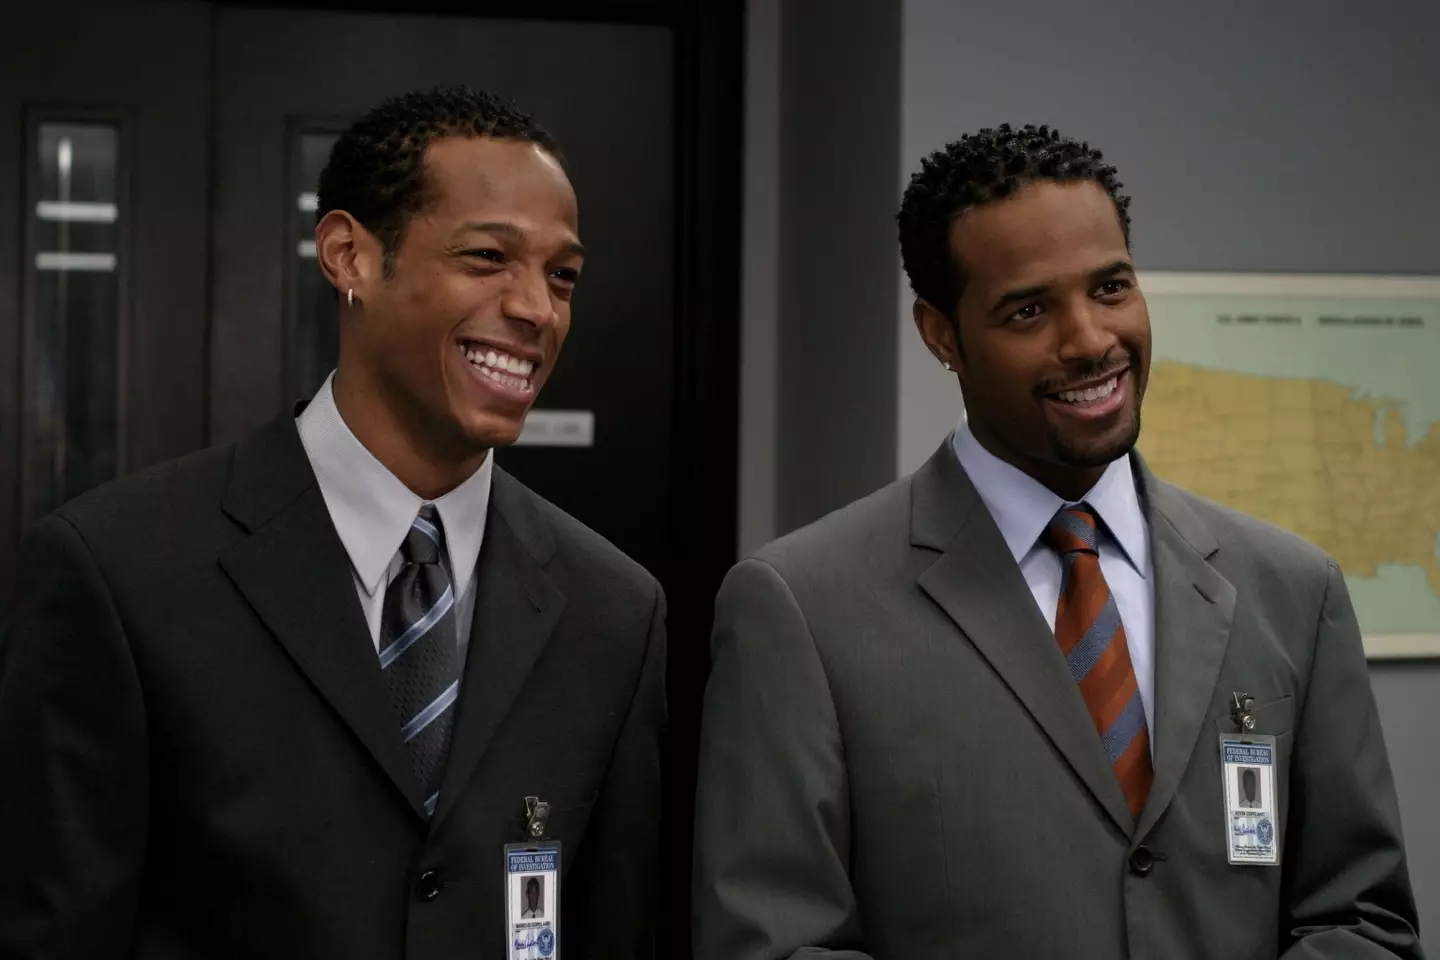 Shawn Wayans as Kevin Copeland and Marlon Wayans as Marcus Copeland in the crime comedy White Chicks.